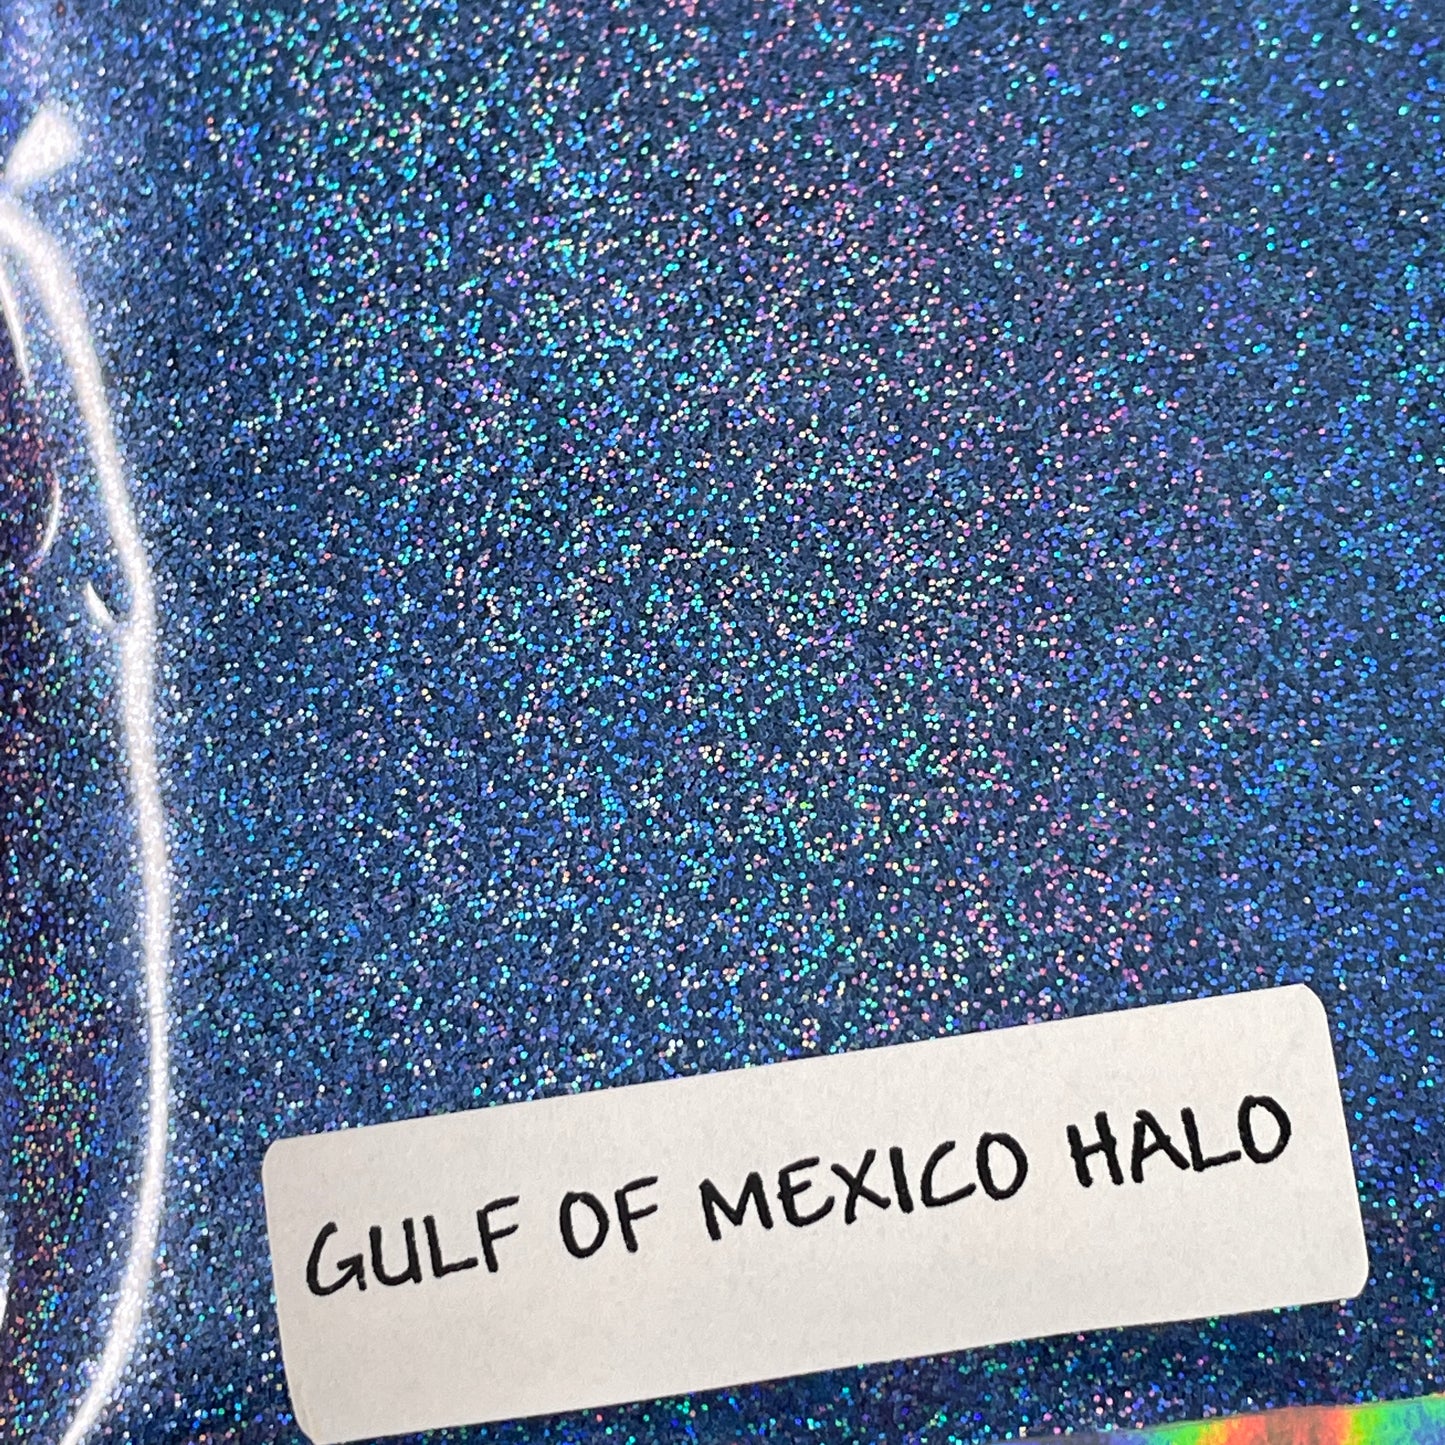 Gulf of Mexico Blue Superfine Holographic Glitter for pens candles earrings clay resin mugs slime tumblers nail art 2 oz